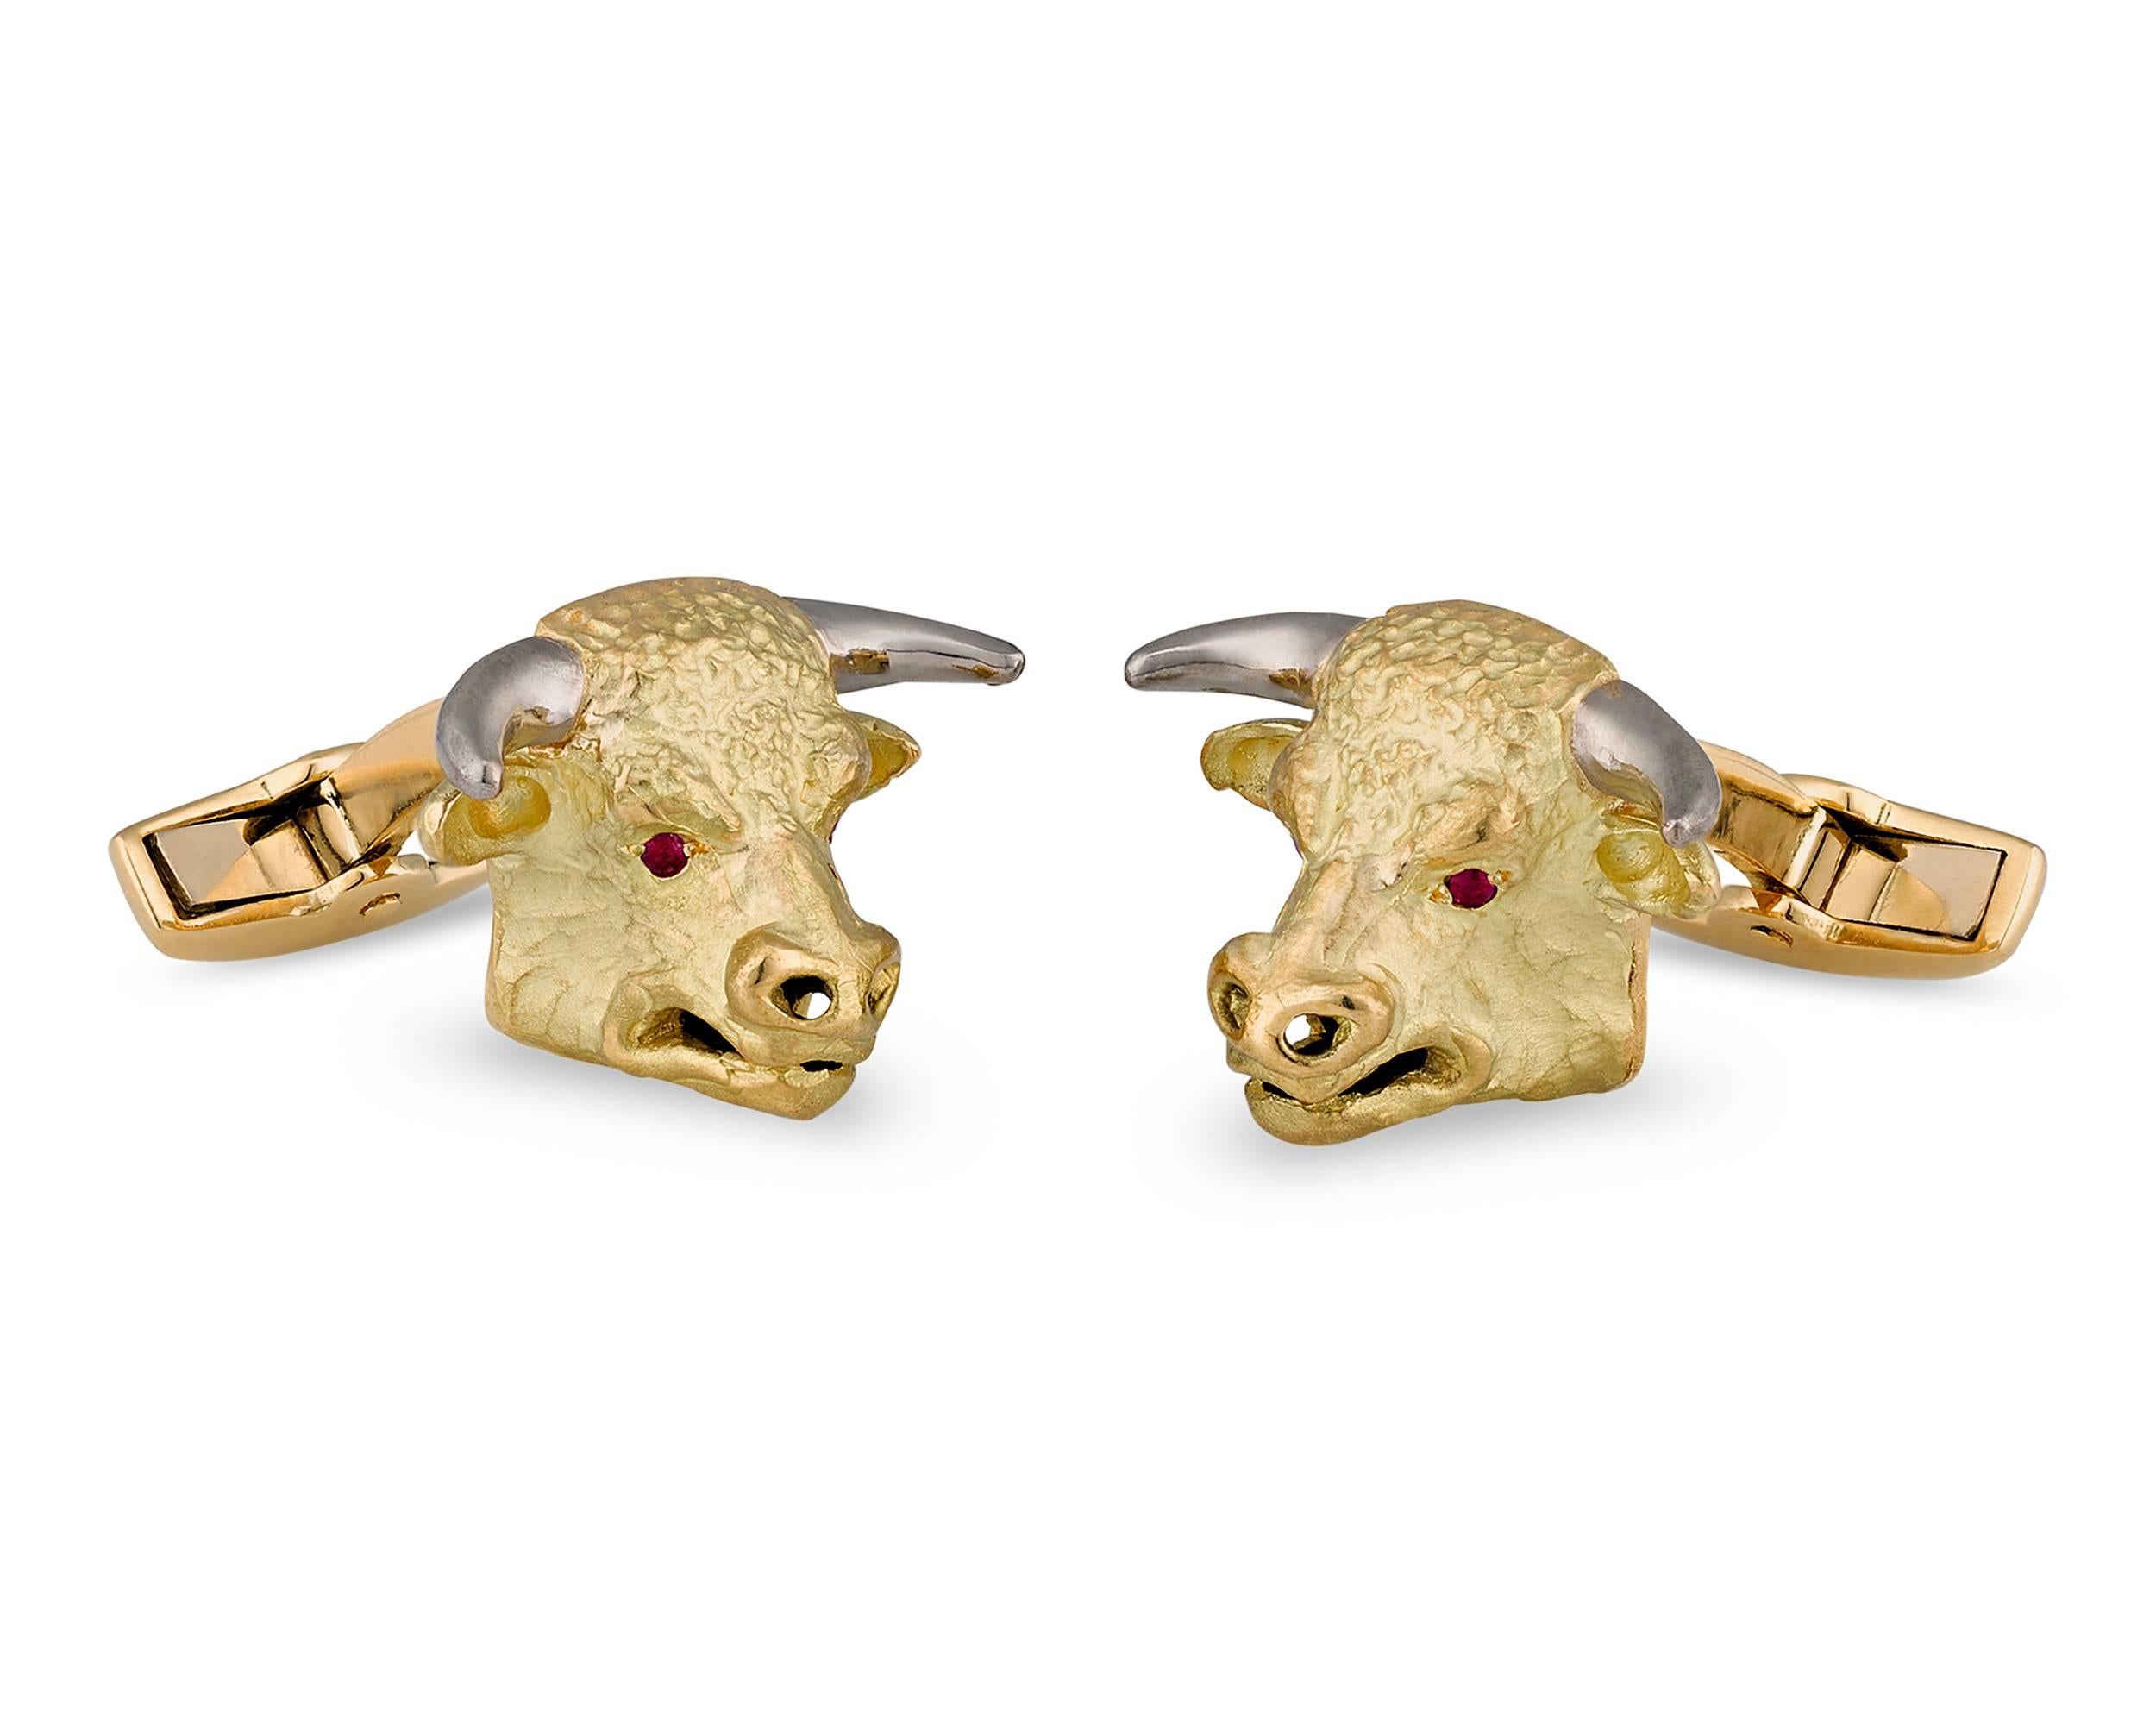 Always enjoy a bull market regardless of the economic outlook with these exceptional British cufflinks. Crafted of 18k gold, the pair are brought to life by enamel by hand-painted enamel and ruby-inset eyes.

Marked 